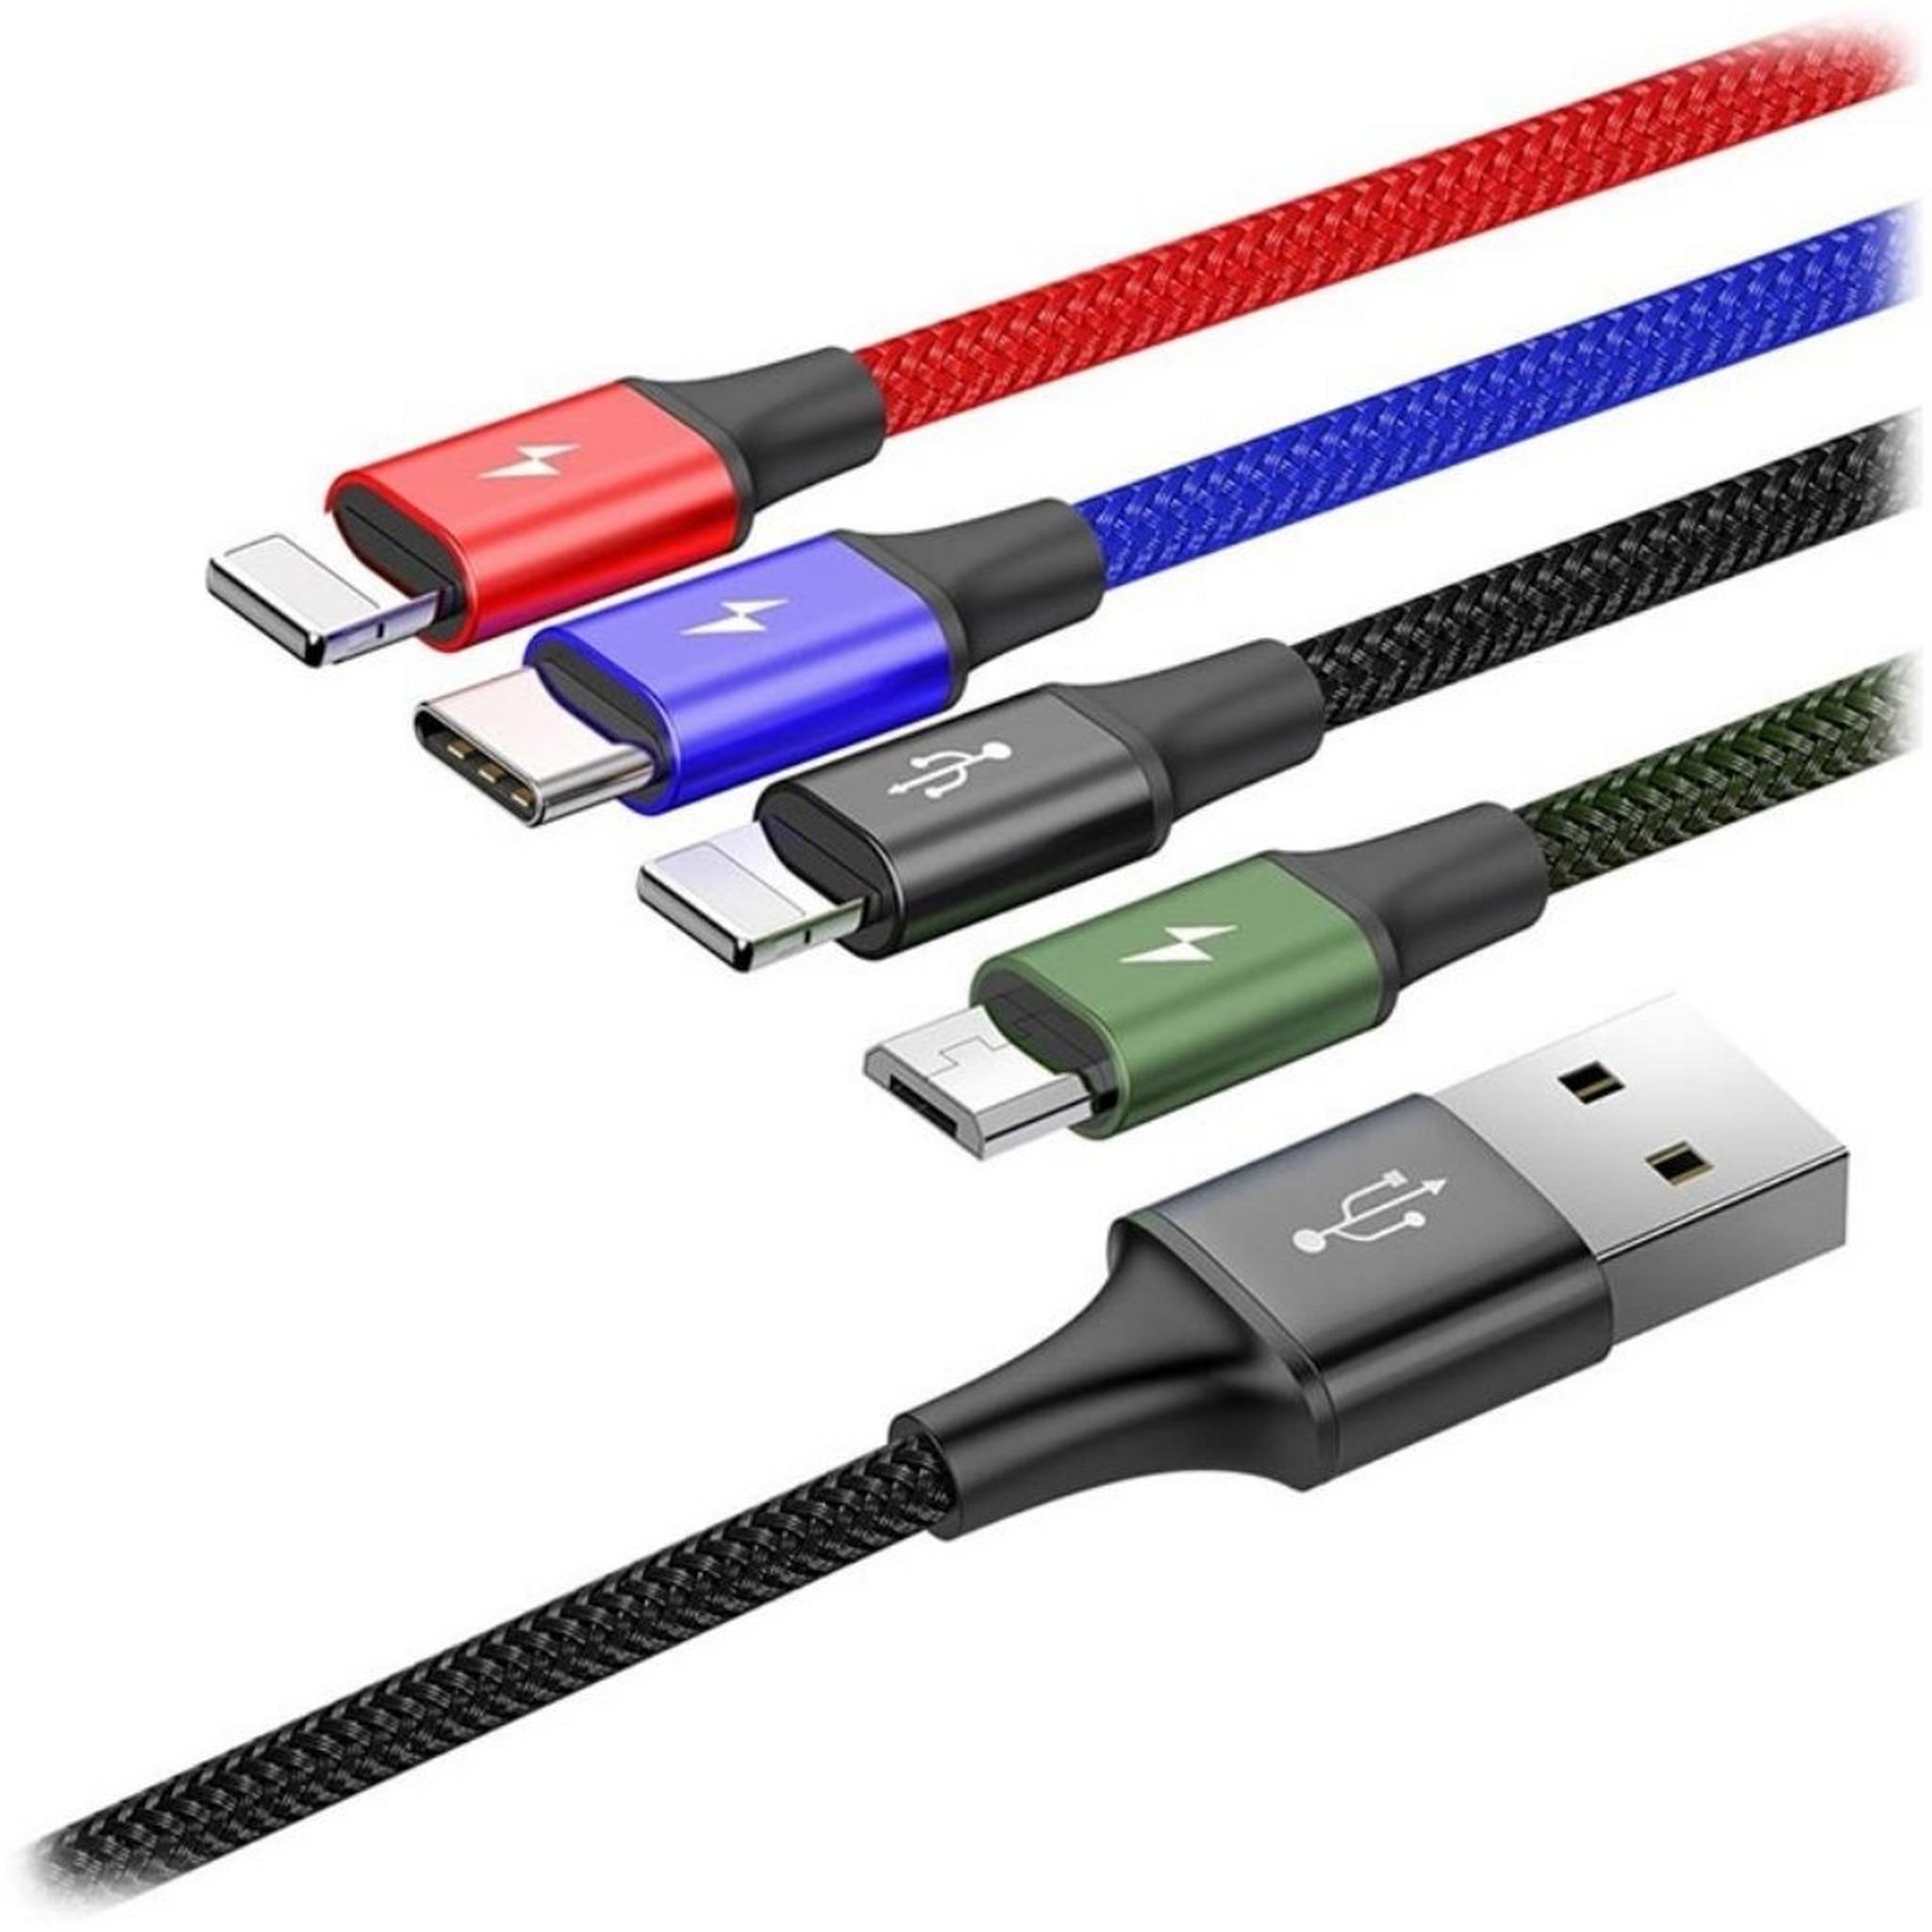 Baseus Fast 4in1 Cable